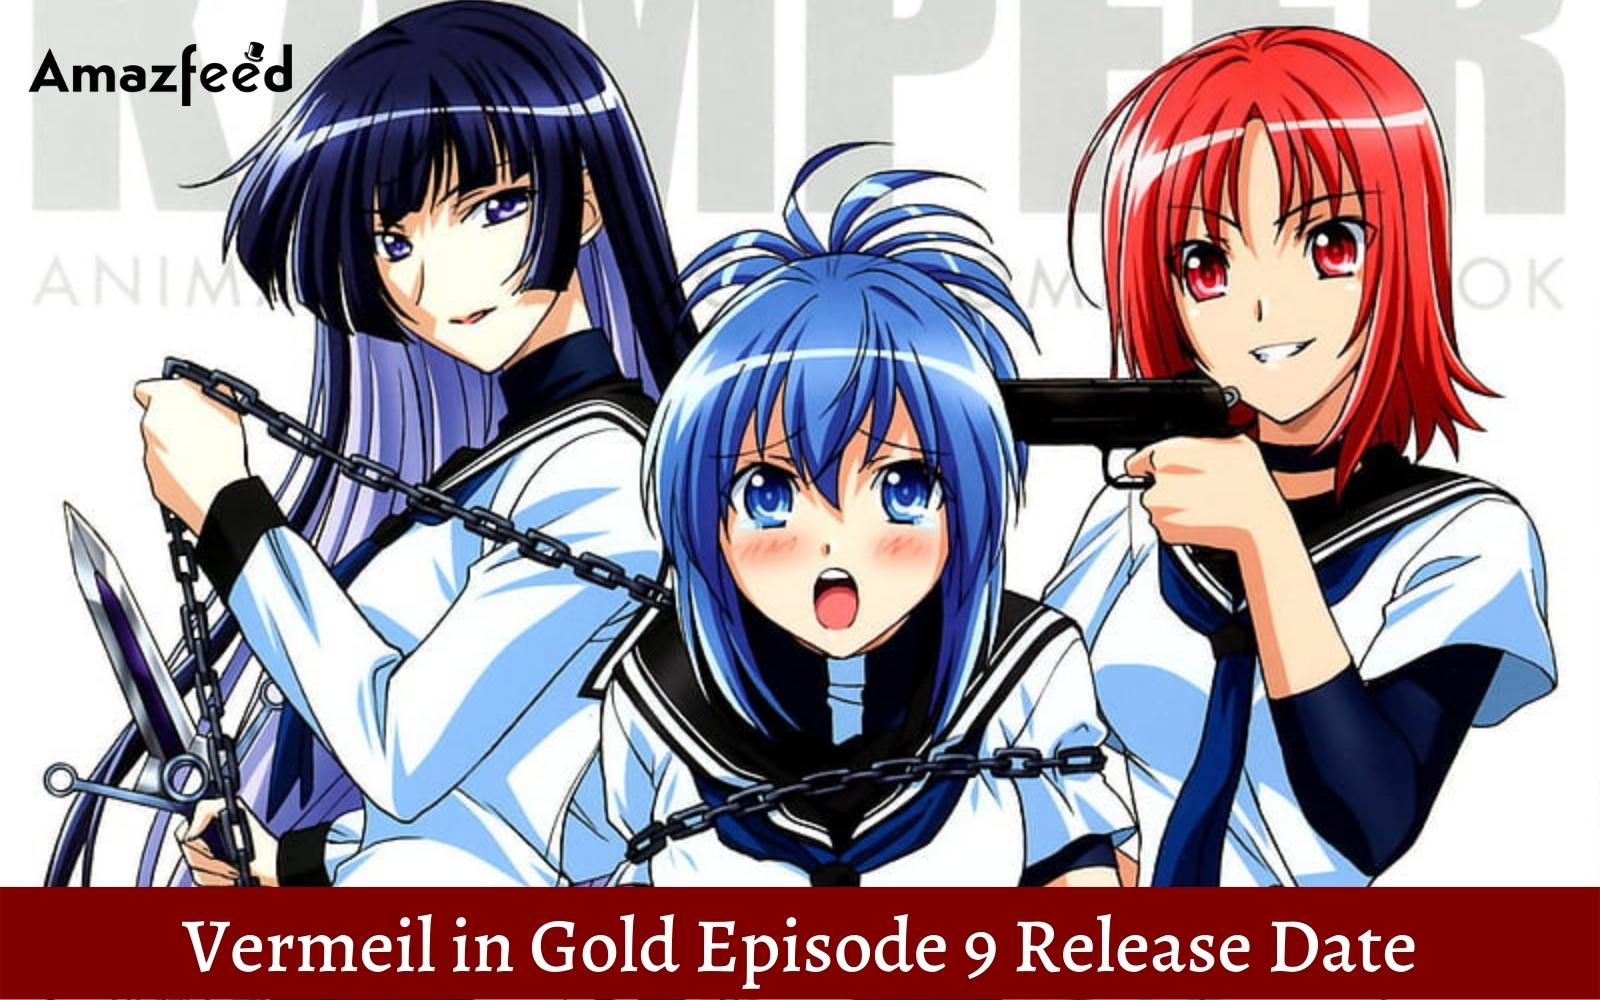 Vermeil in Gold Episode 9 Preview Images Released